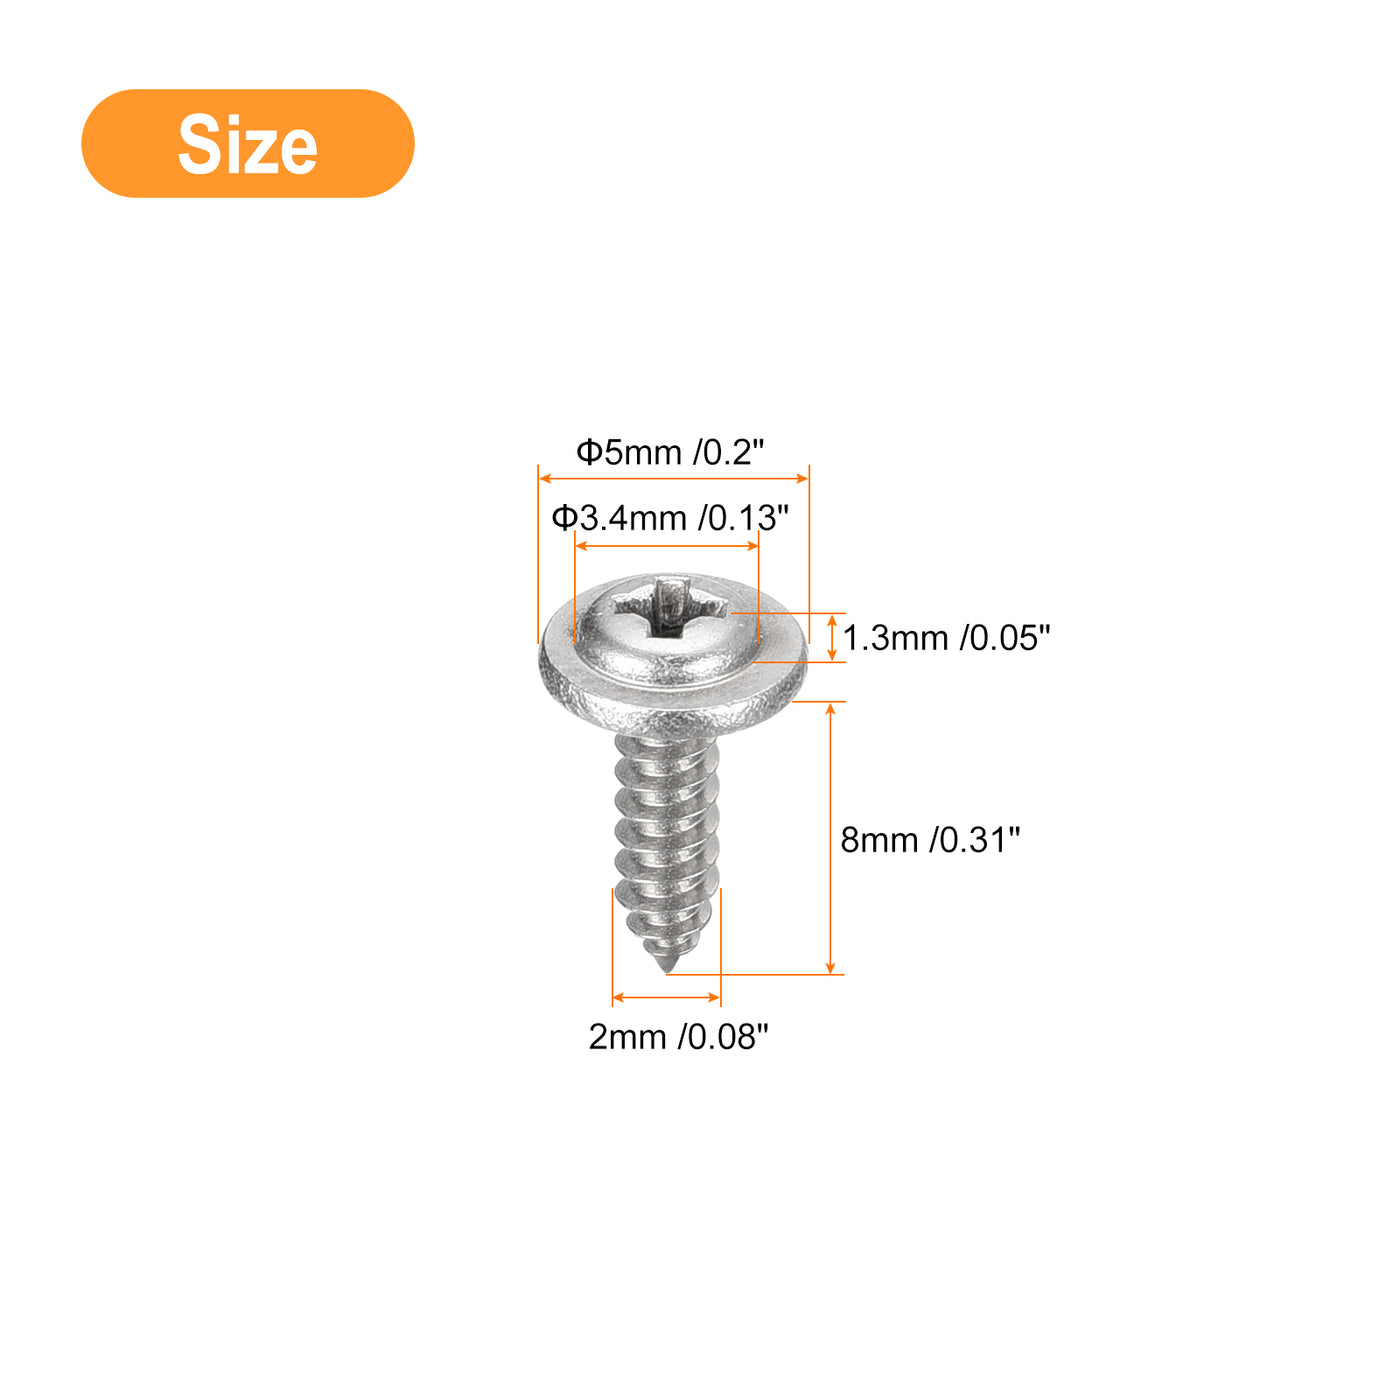 uxcell Uxcell ST2x8mm Phillips Pan Head Self-tapping Screw with Washer, 100pcs - 304 Stainless Steel Wood Screw Full Thread (Silver)